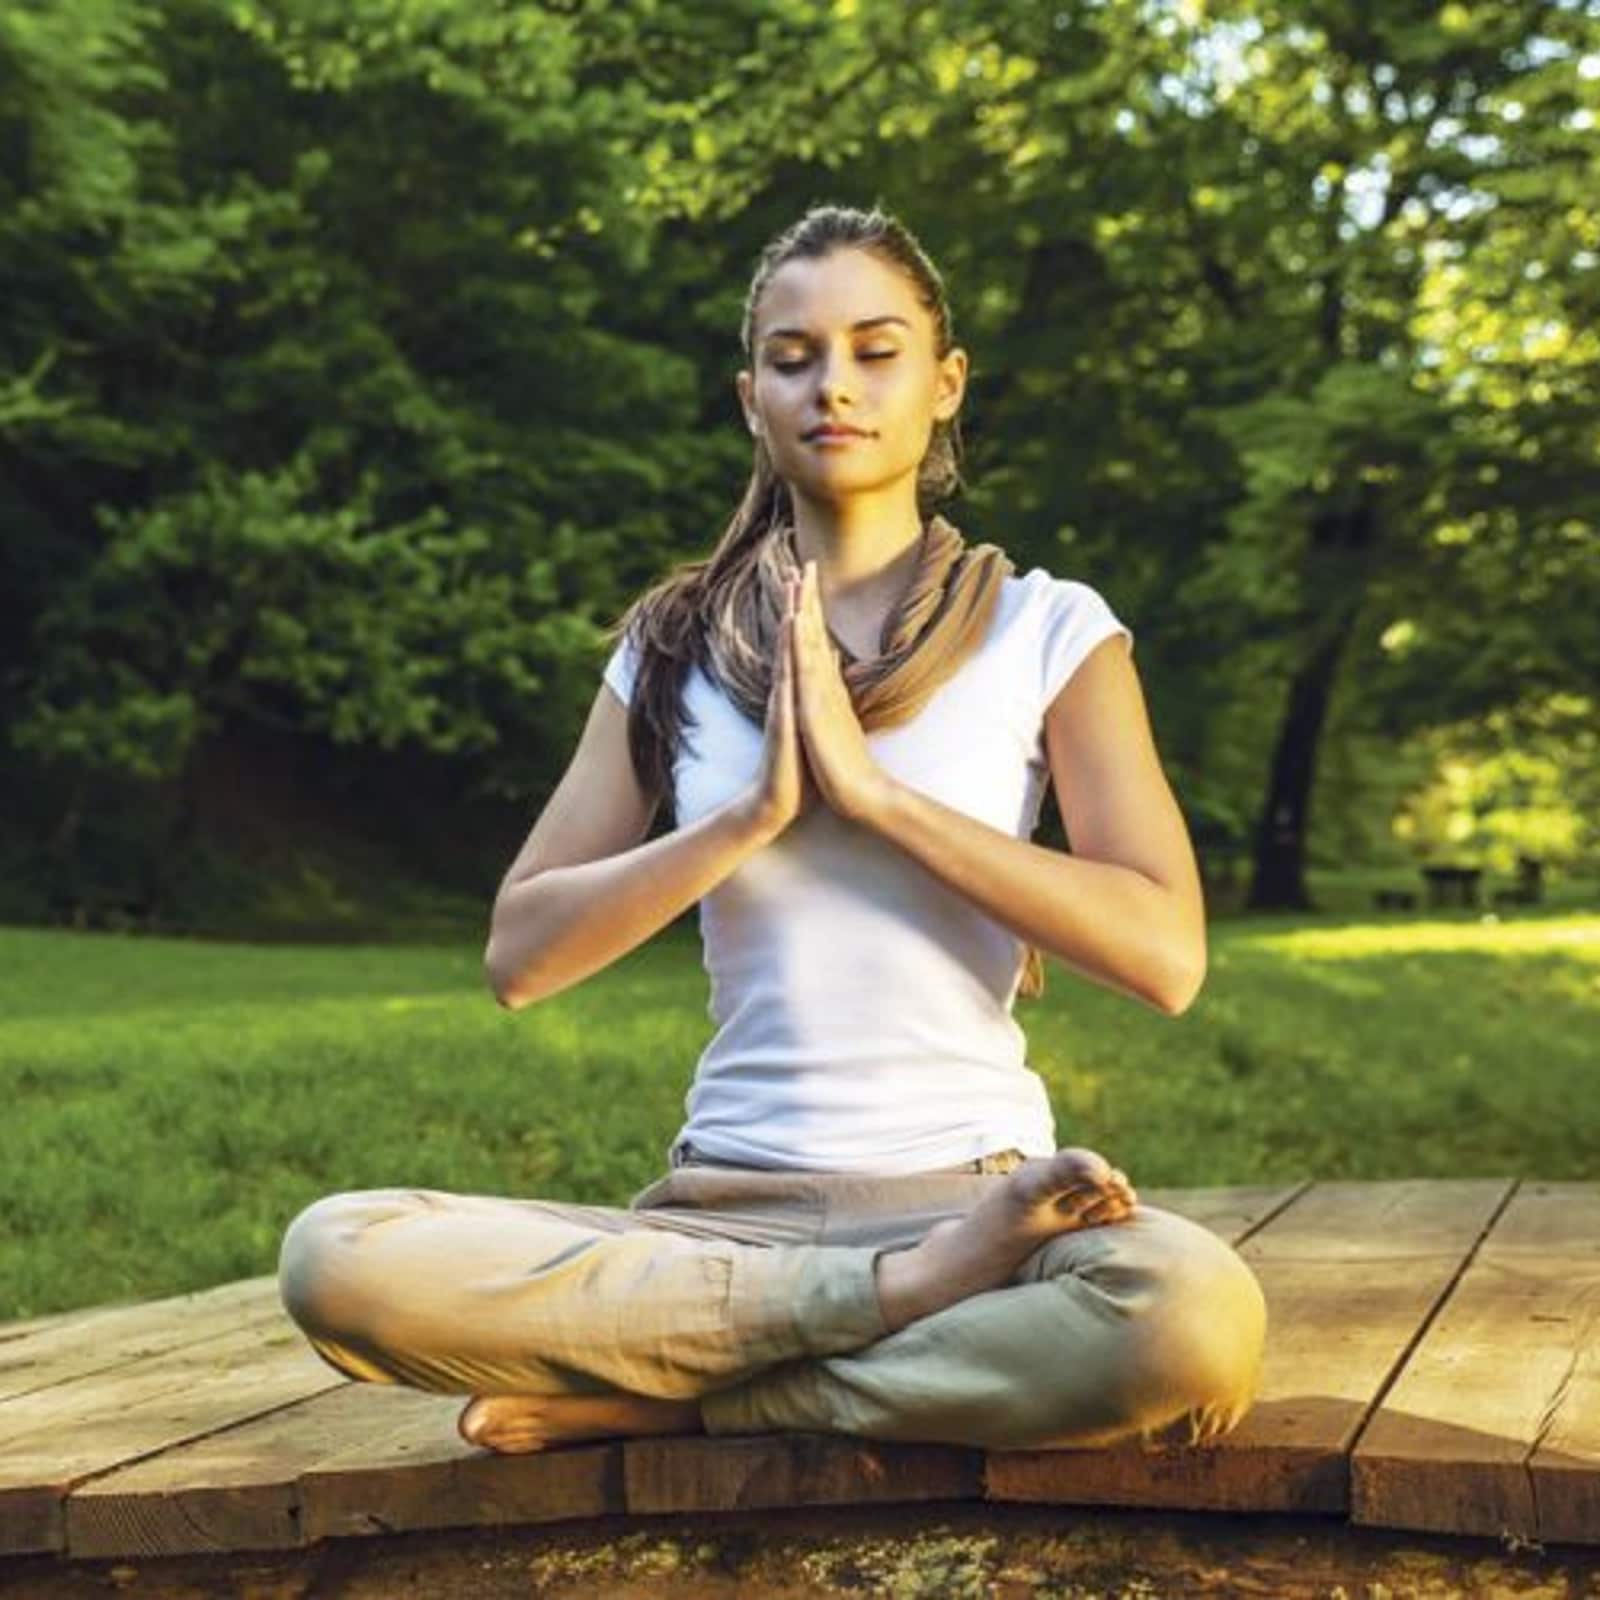 Morning meditation is important to reduce morning anxiety.